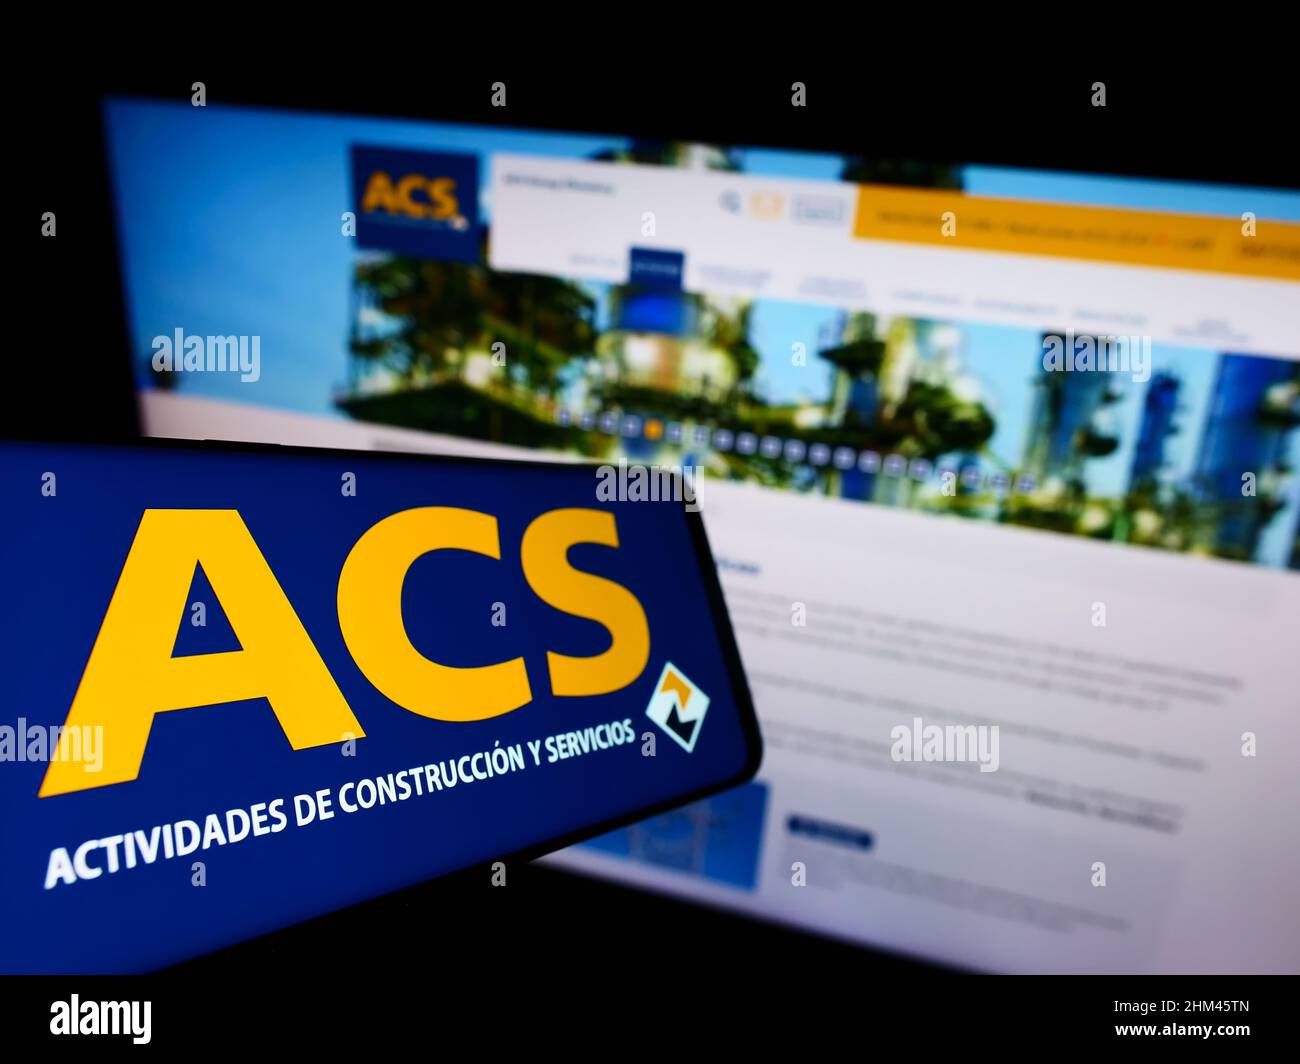 Grupo Acs High Resolution Stock Photography and Images - Alamy